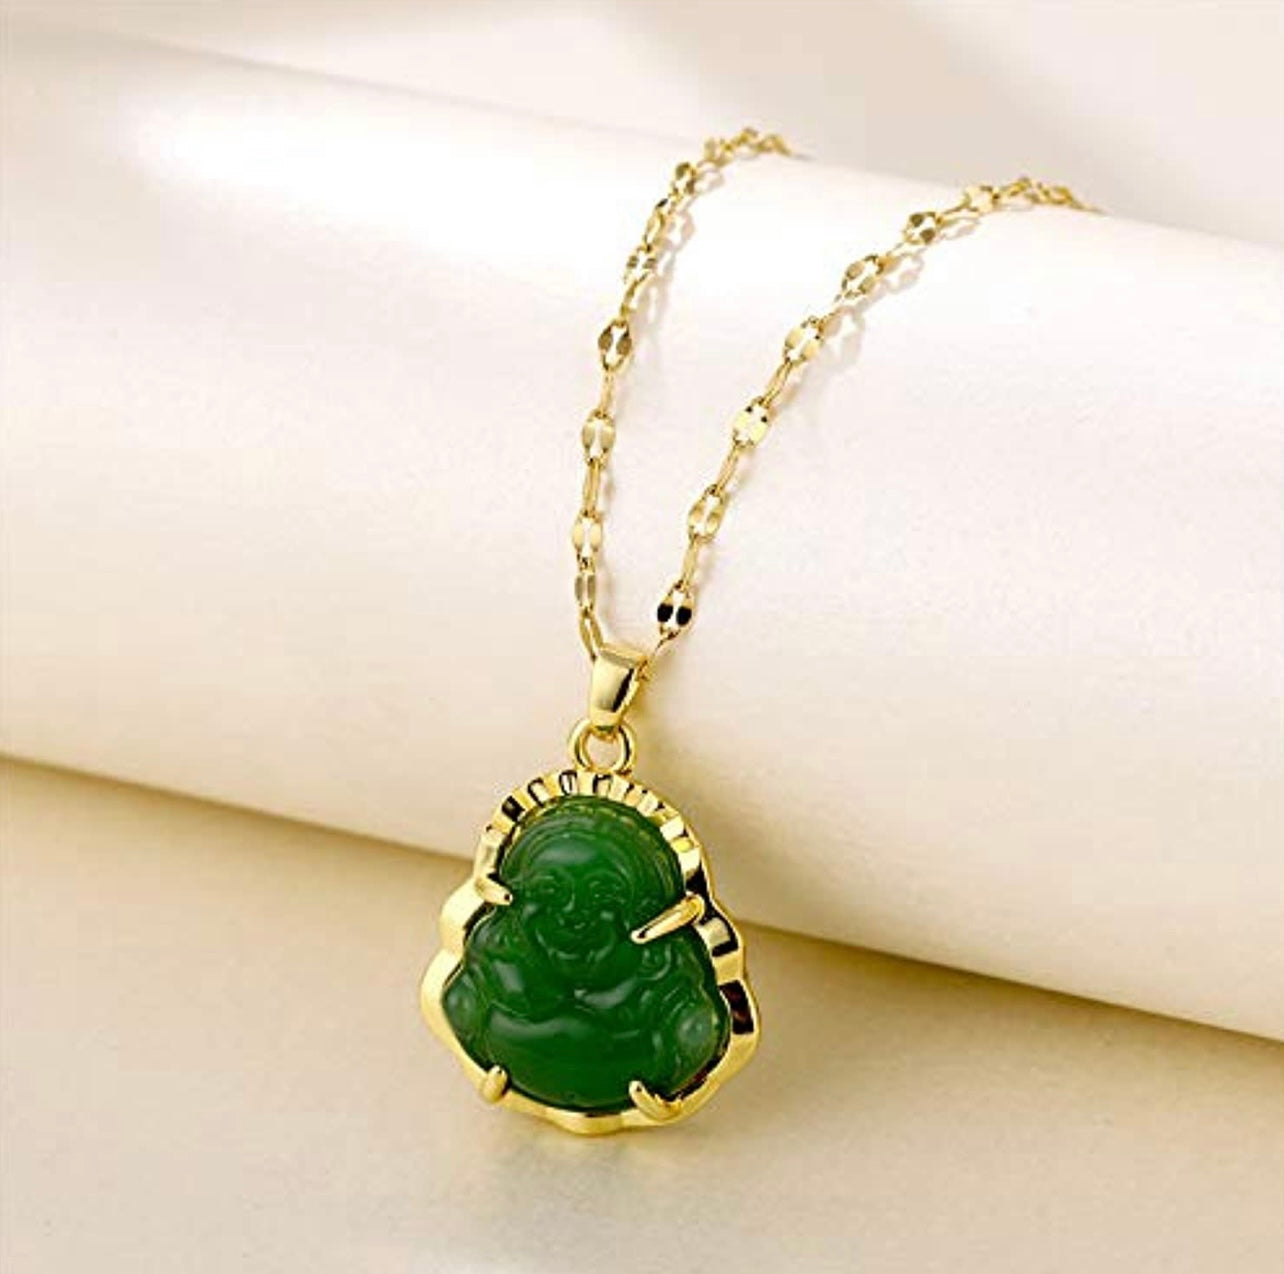 18k Gold Plated Laughing Buddha Pendant Necklace Green Jade